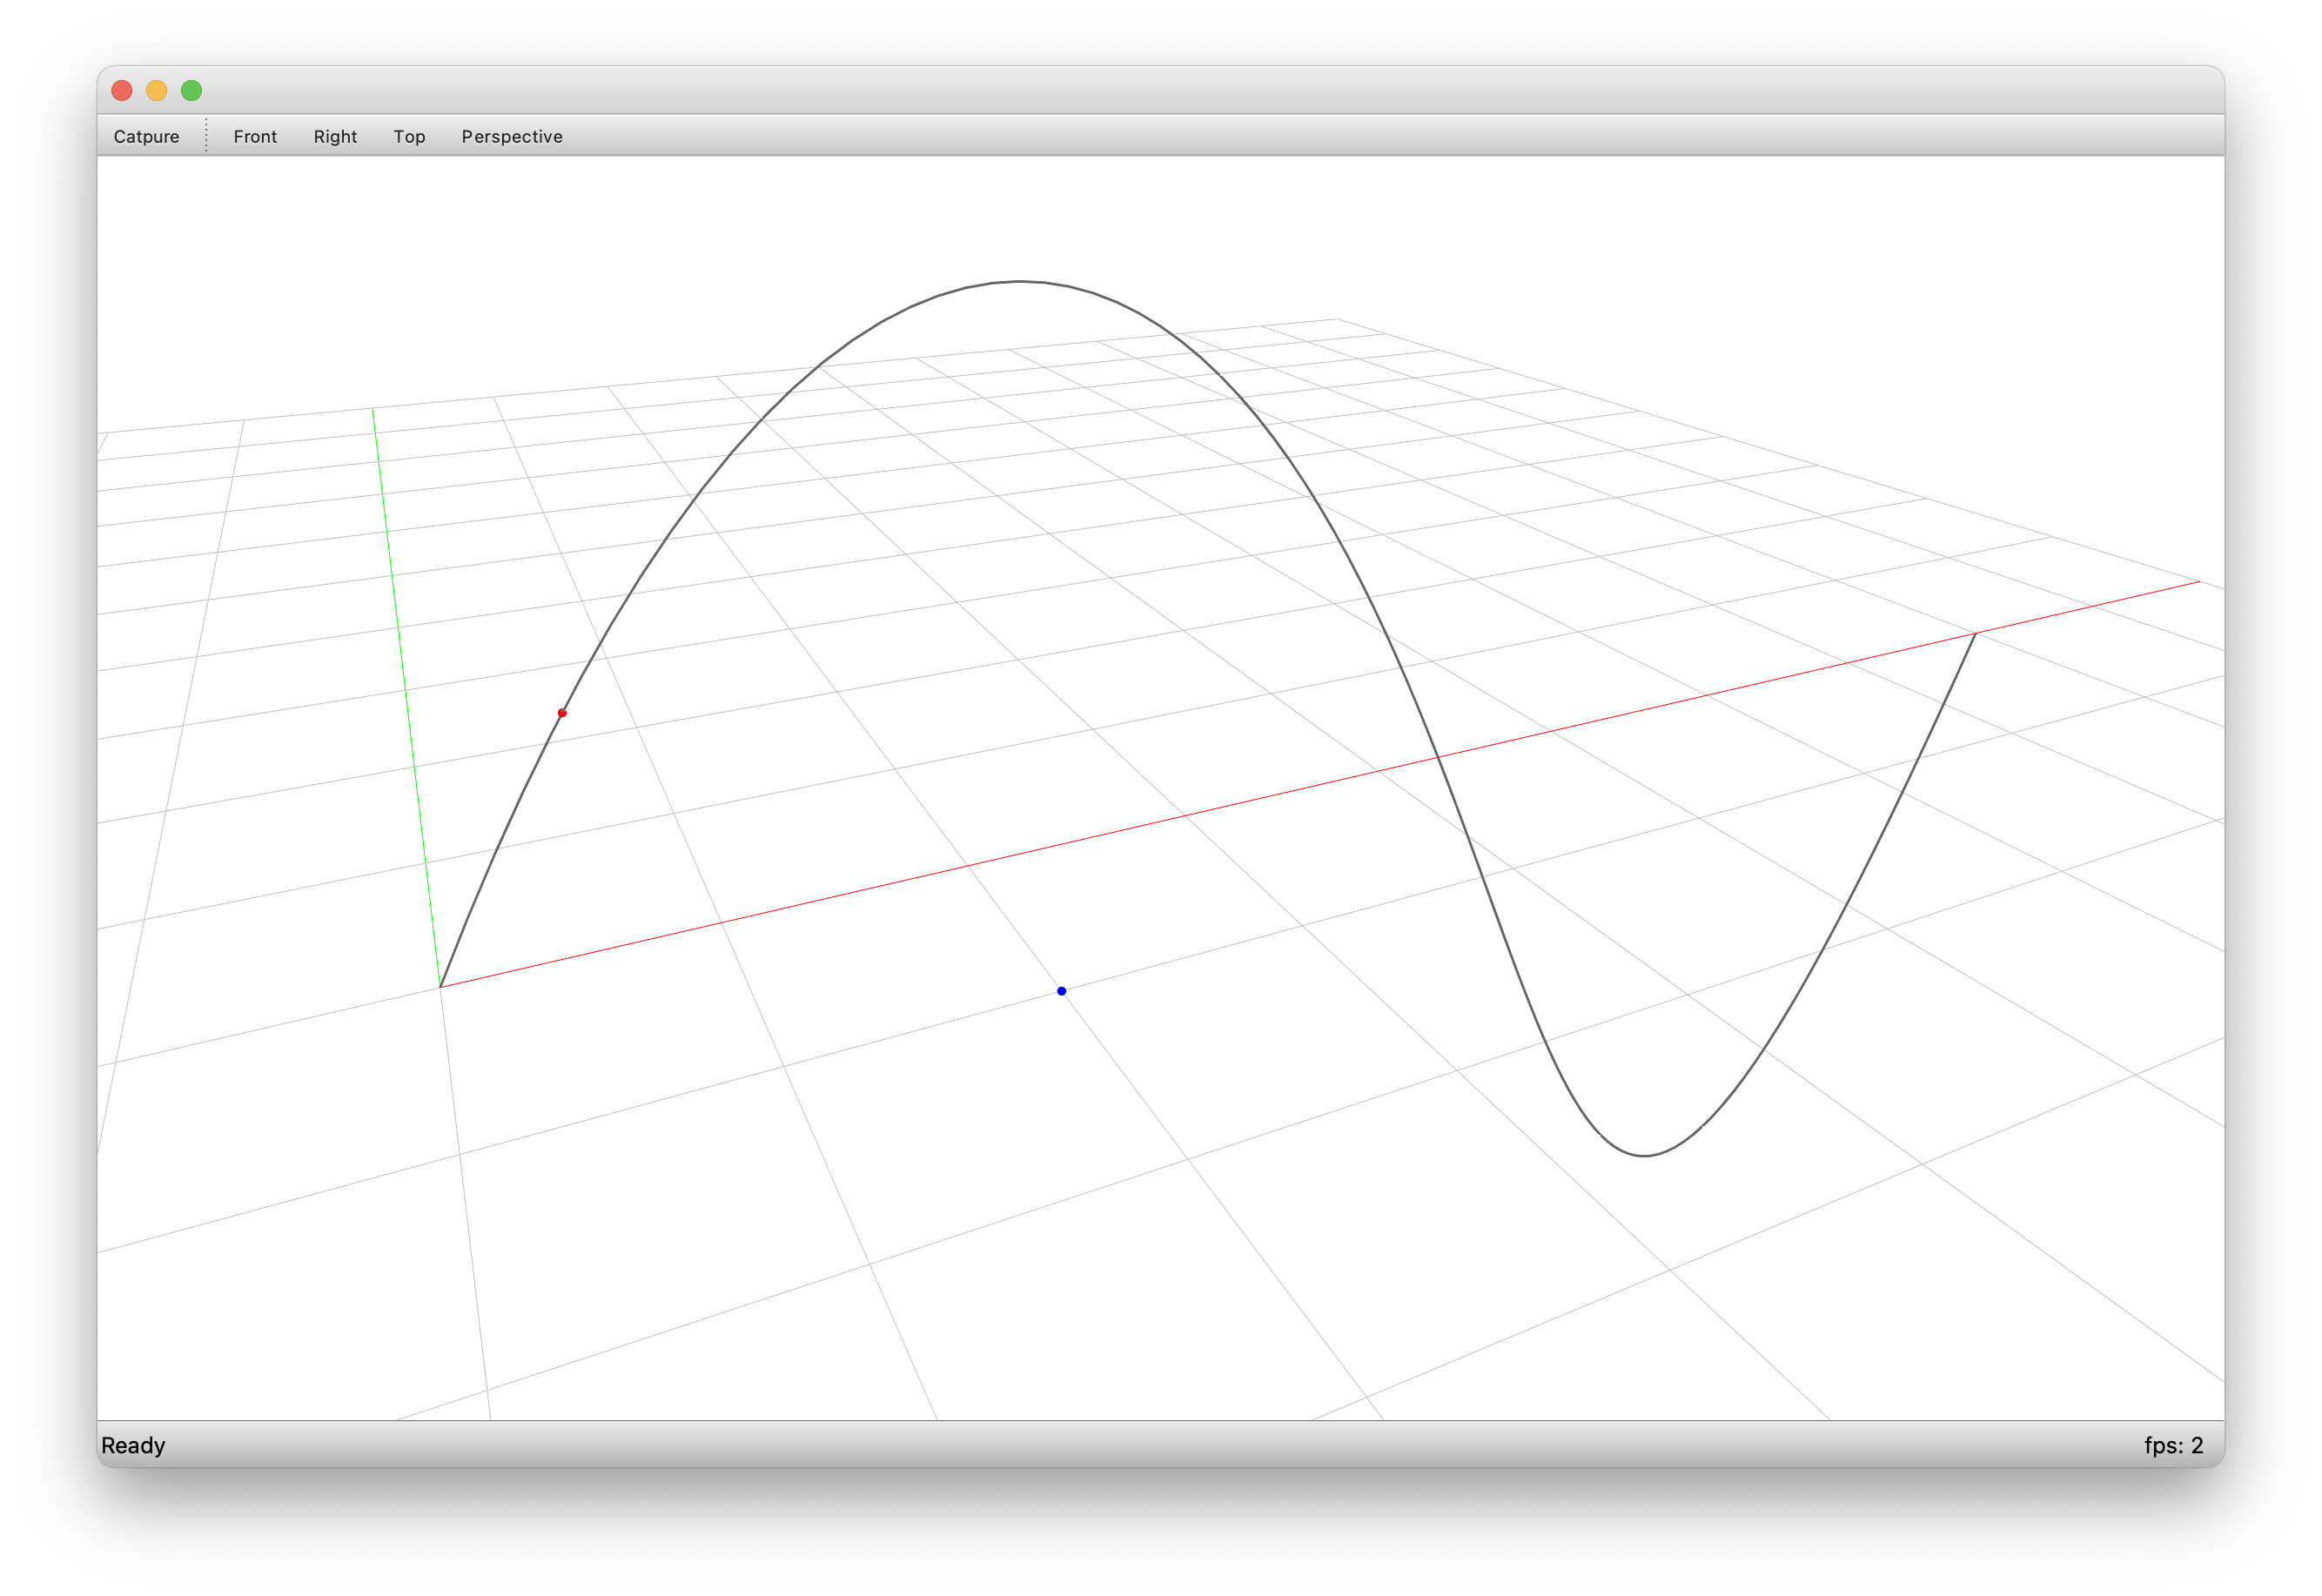 ../../_images/example_curve_closest_point.png